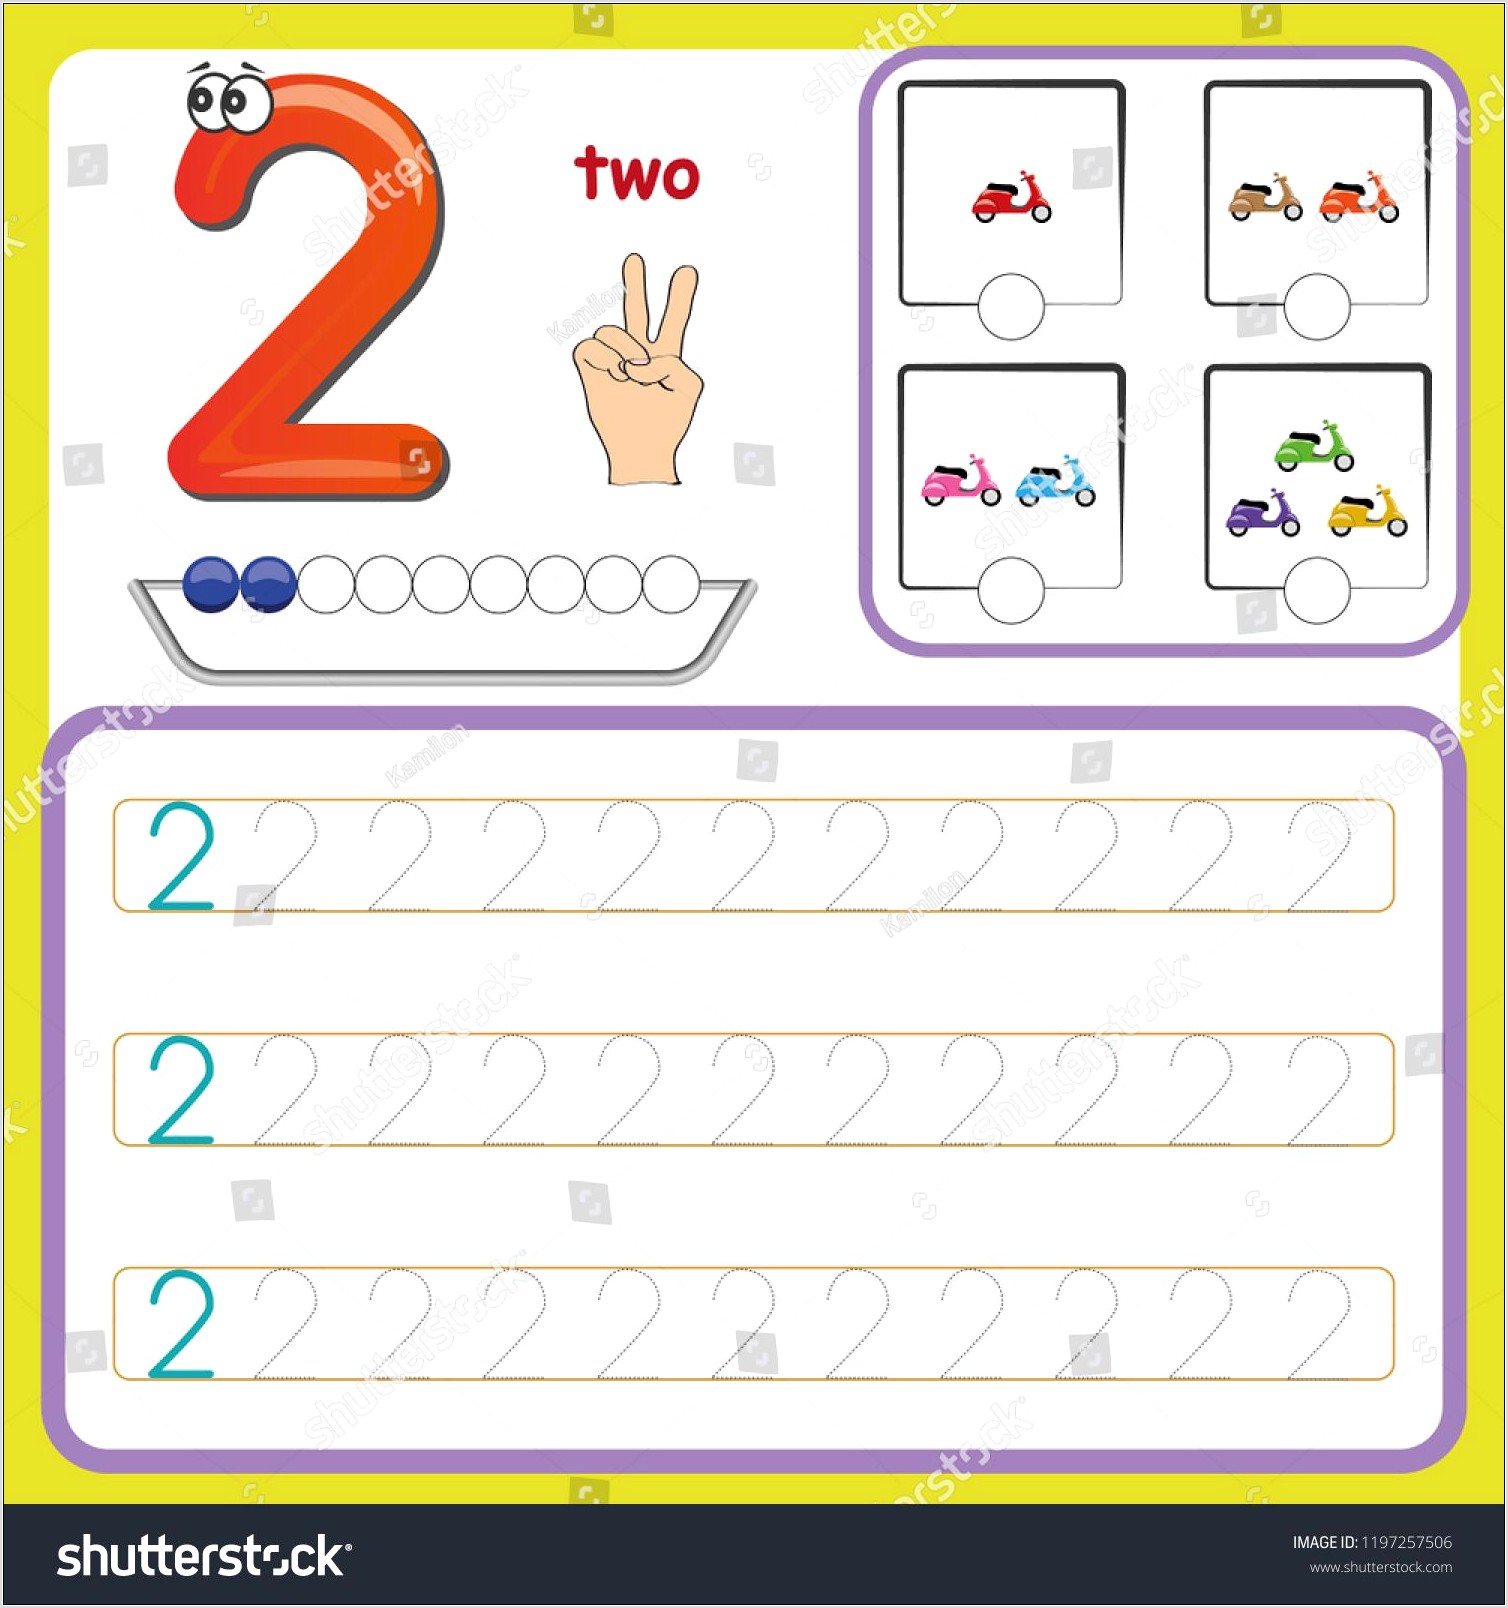 Number Tracing And Writing Worksheet